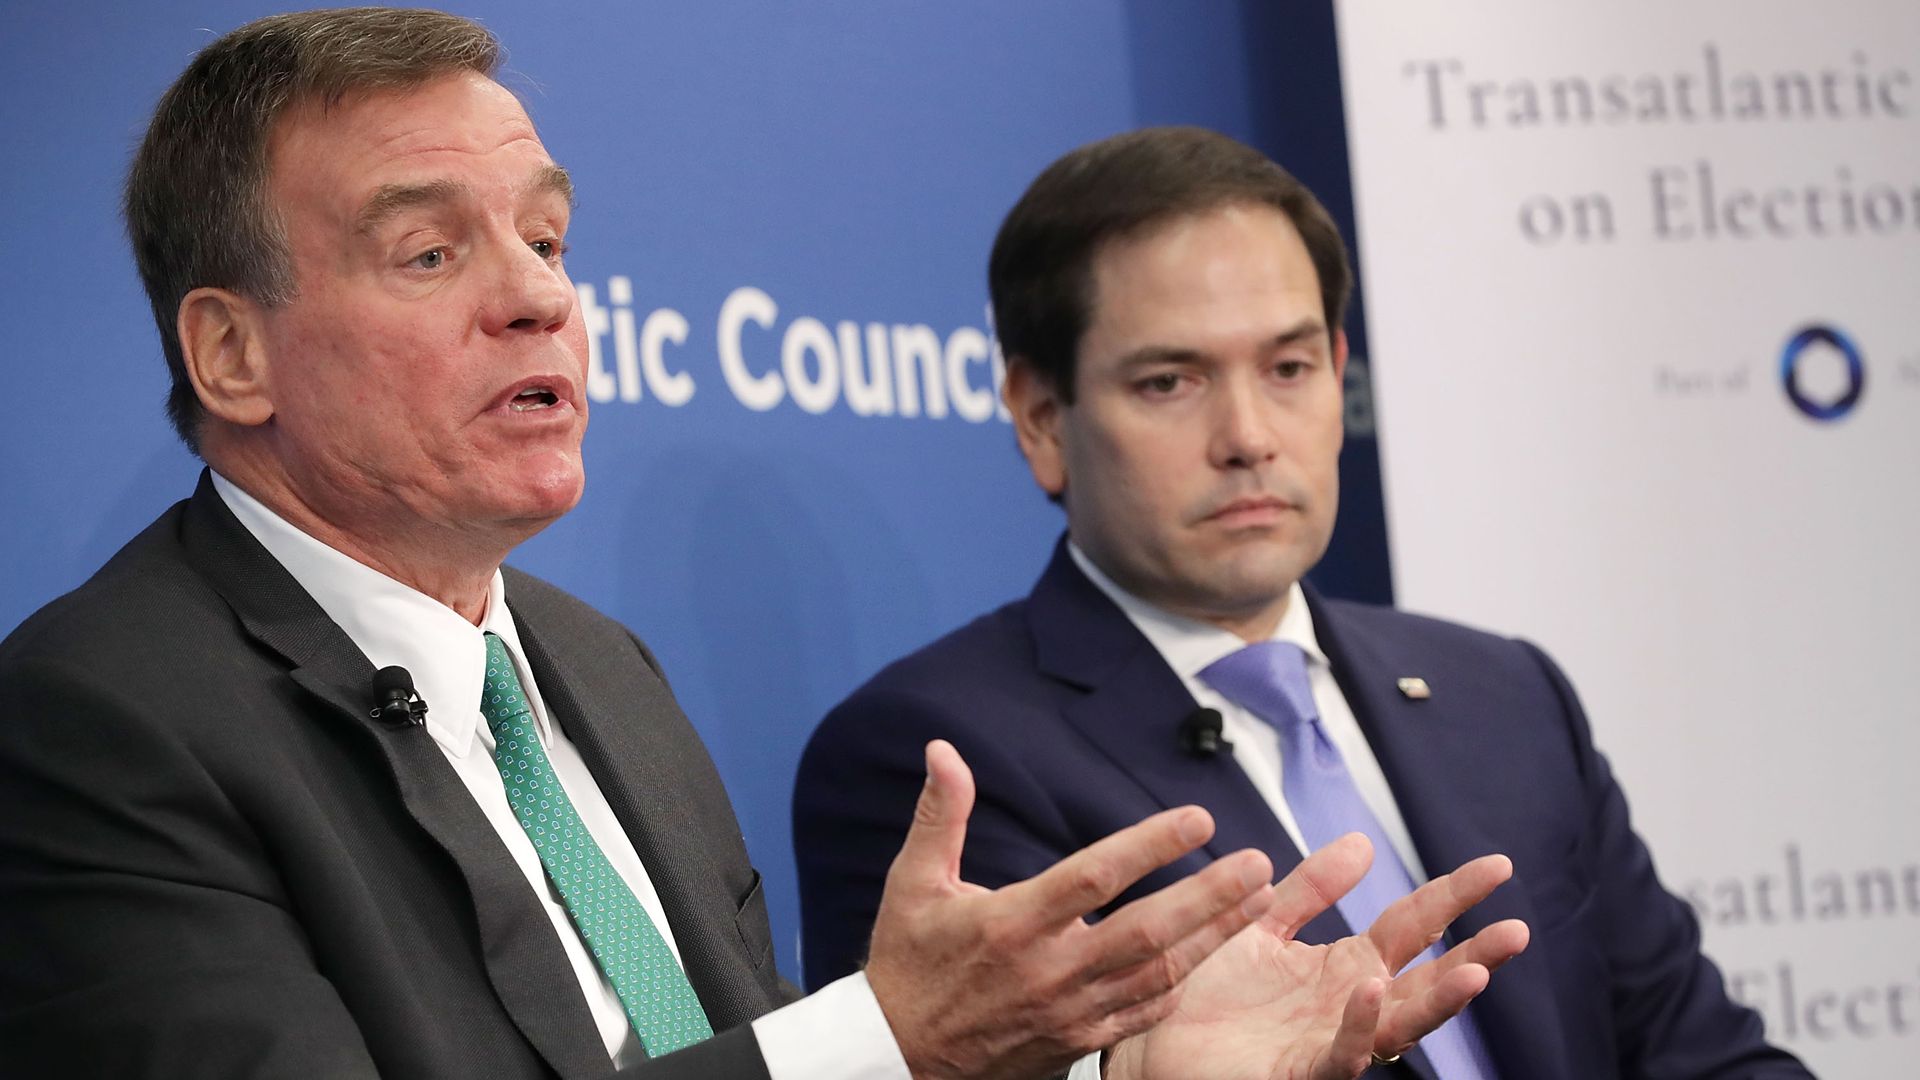 Sen. Mark Warner (D-VA) (L) and Sen. Marco Rubio (R-FL), both members of the Senate Intelligence Committee, participate in a discussion at the Atlantic Council July 16, 2018 in Washington, DC. 